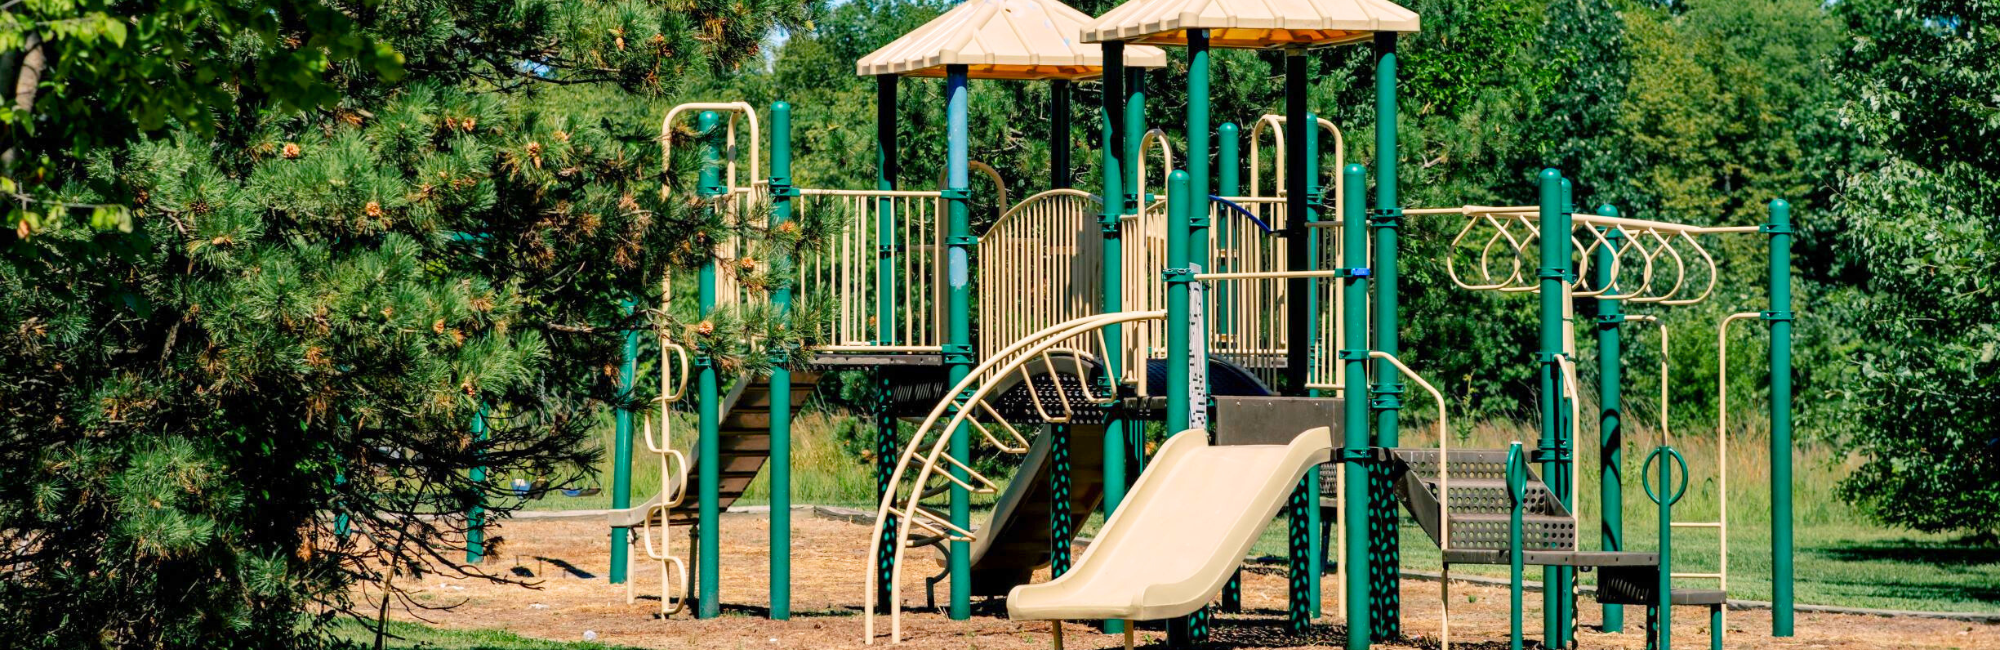 Photo of a playground with trees around it